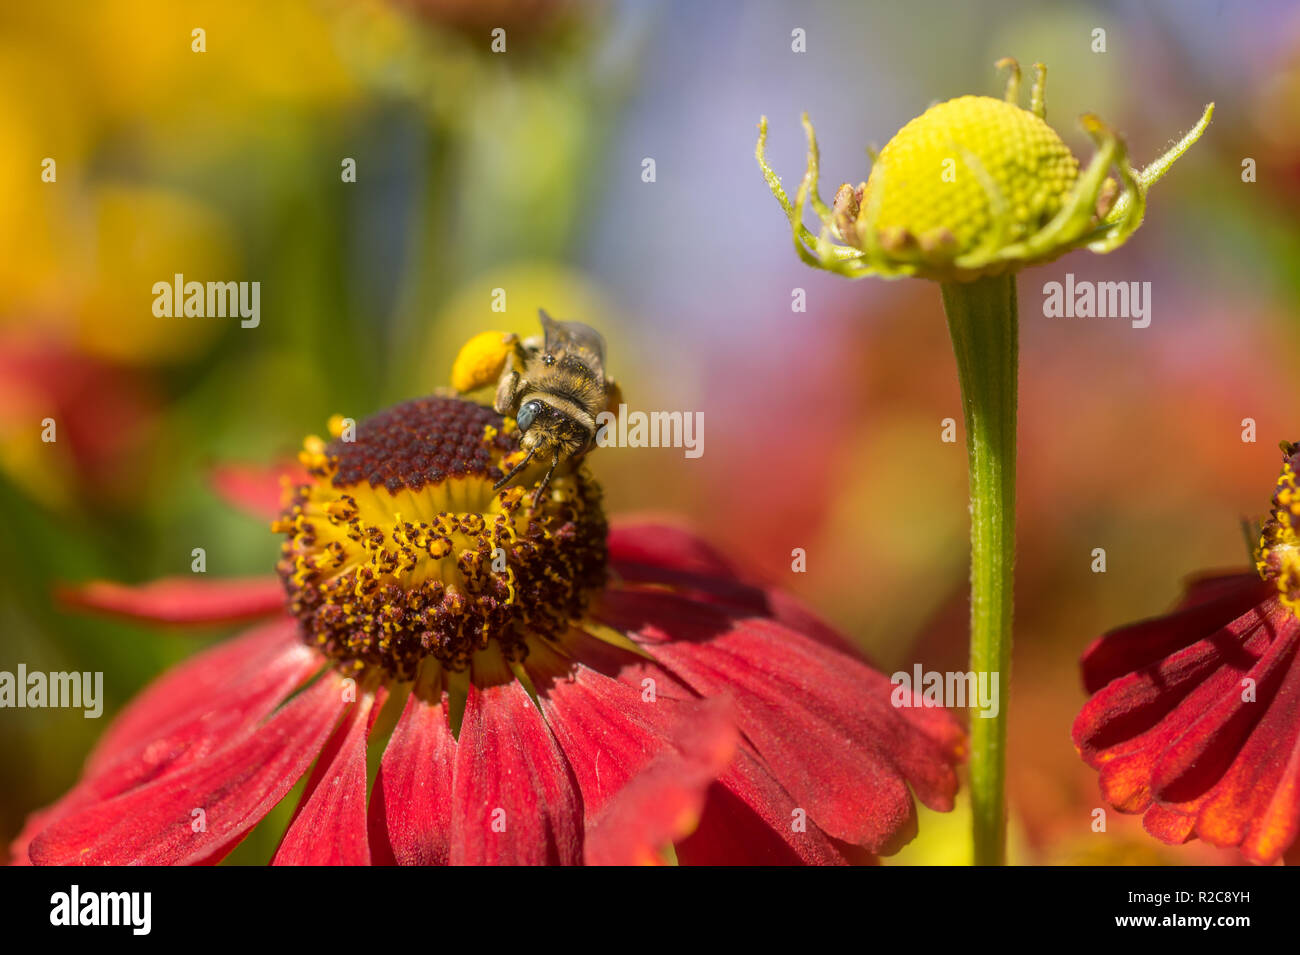 A female Long-horned Bee (Melissodes) gathering pollen from a red Helenium flower in a pollinator garden. Stock Photo